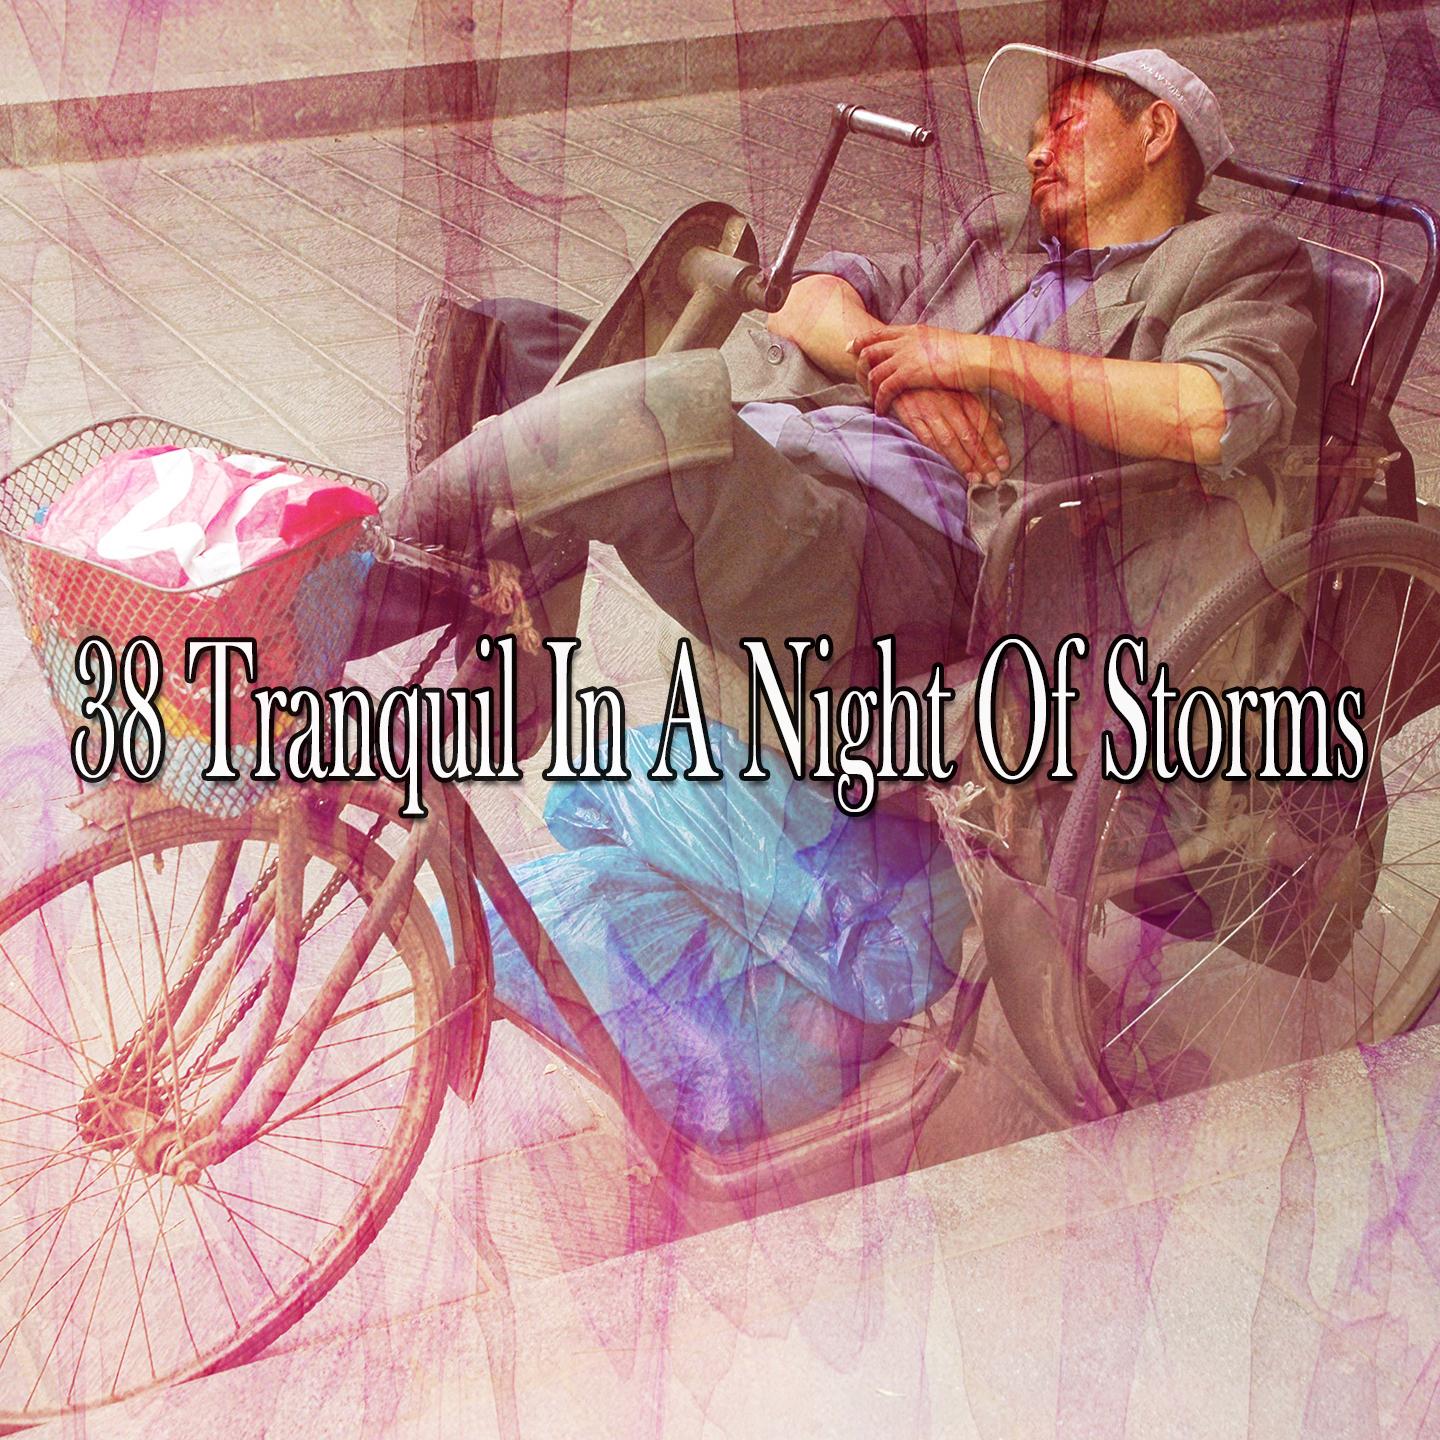 38 Tranquil in a Night of Storms